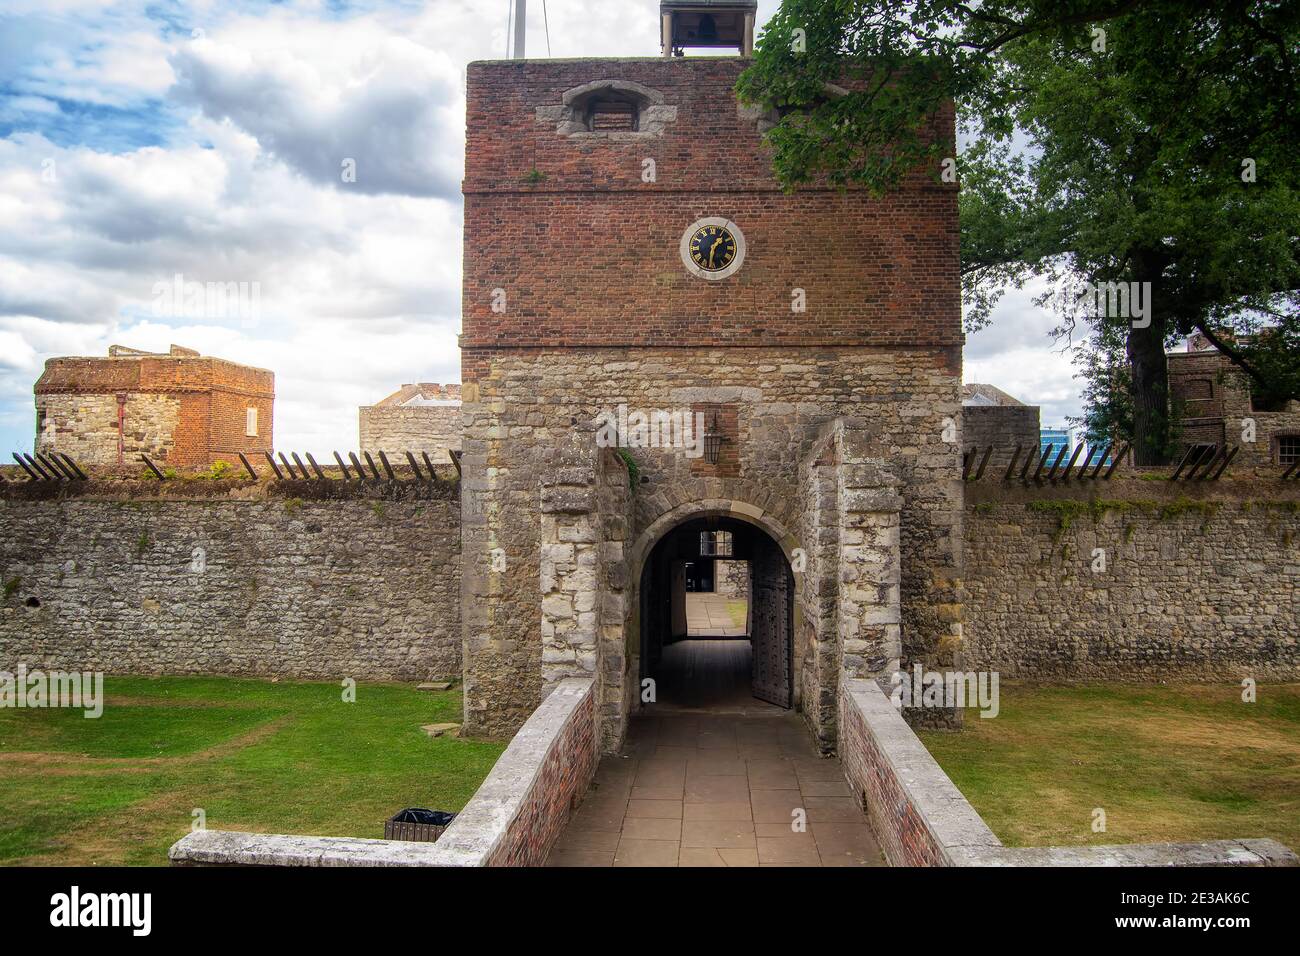 View of the entrance of Upnor castle. Stock Photo